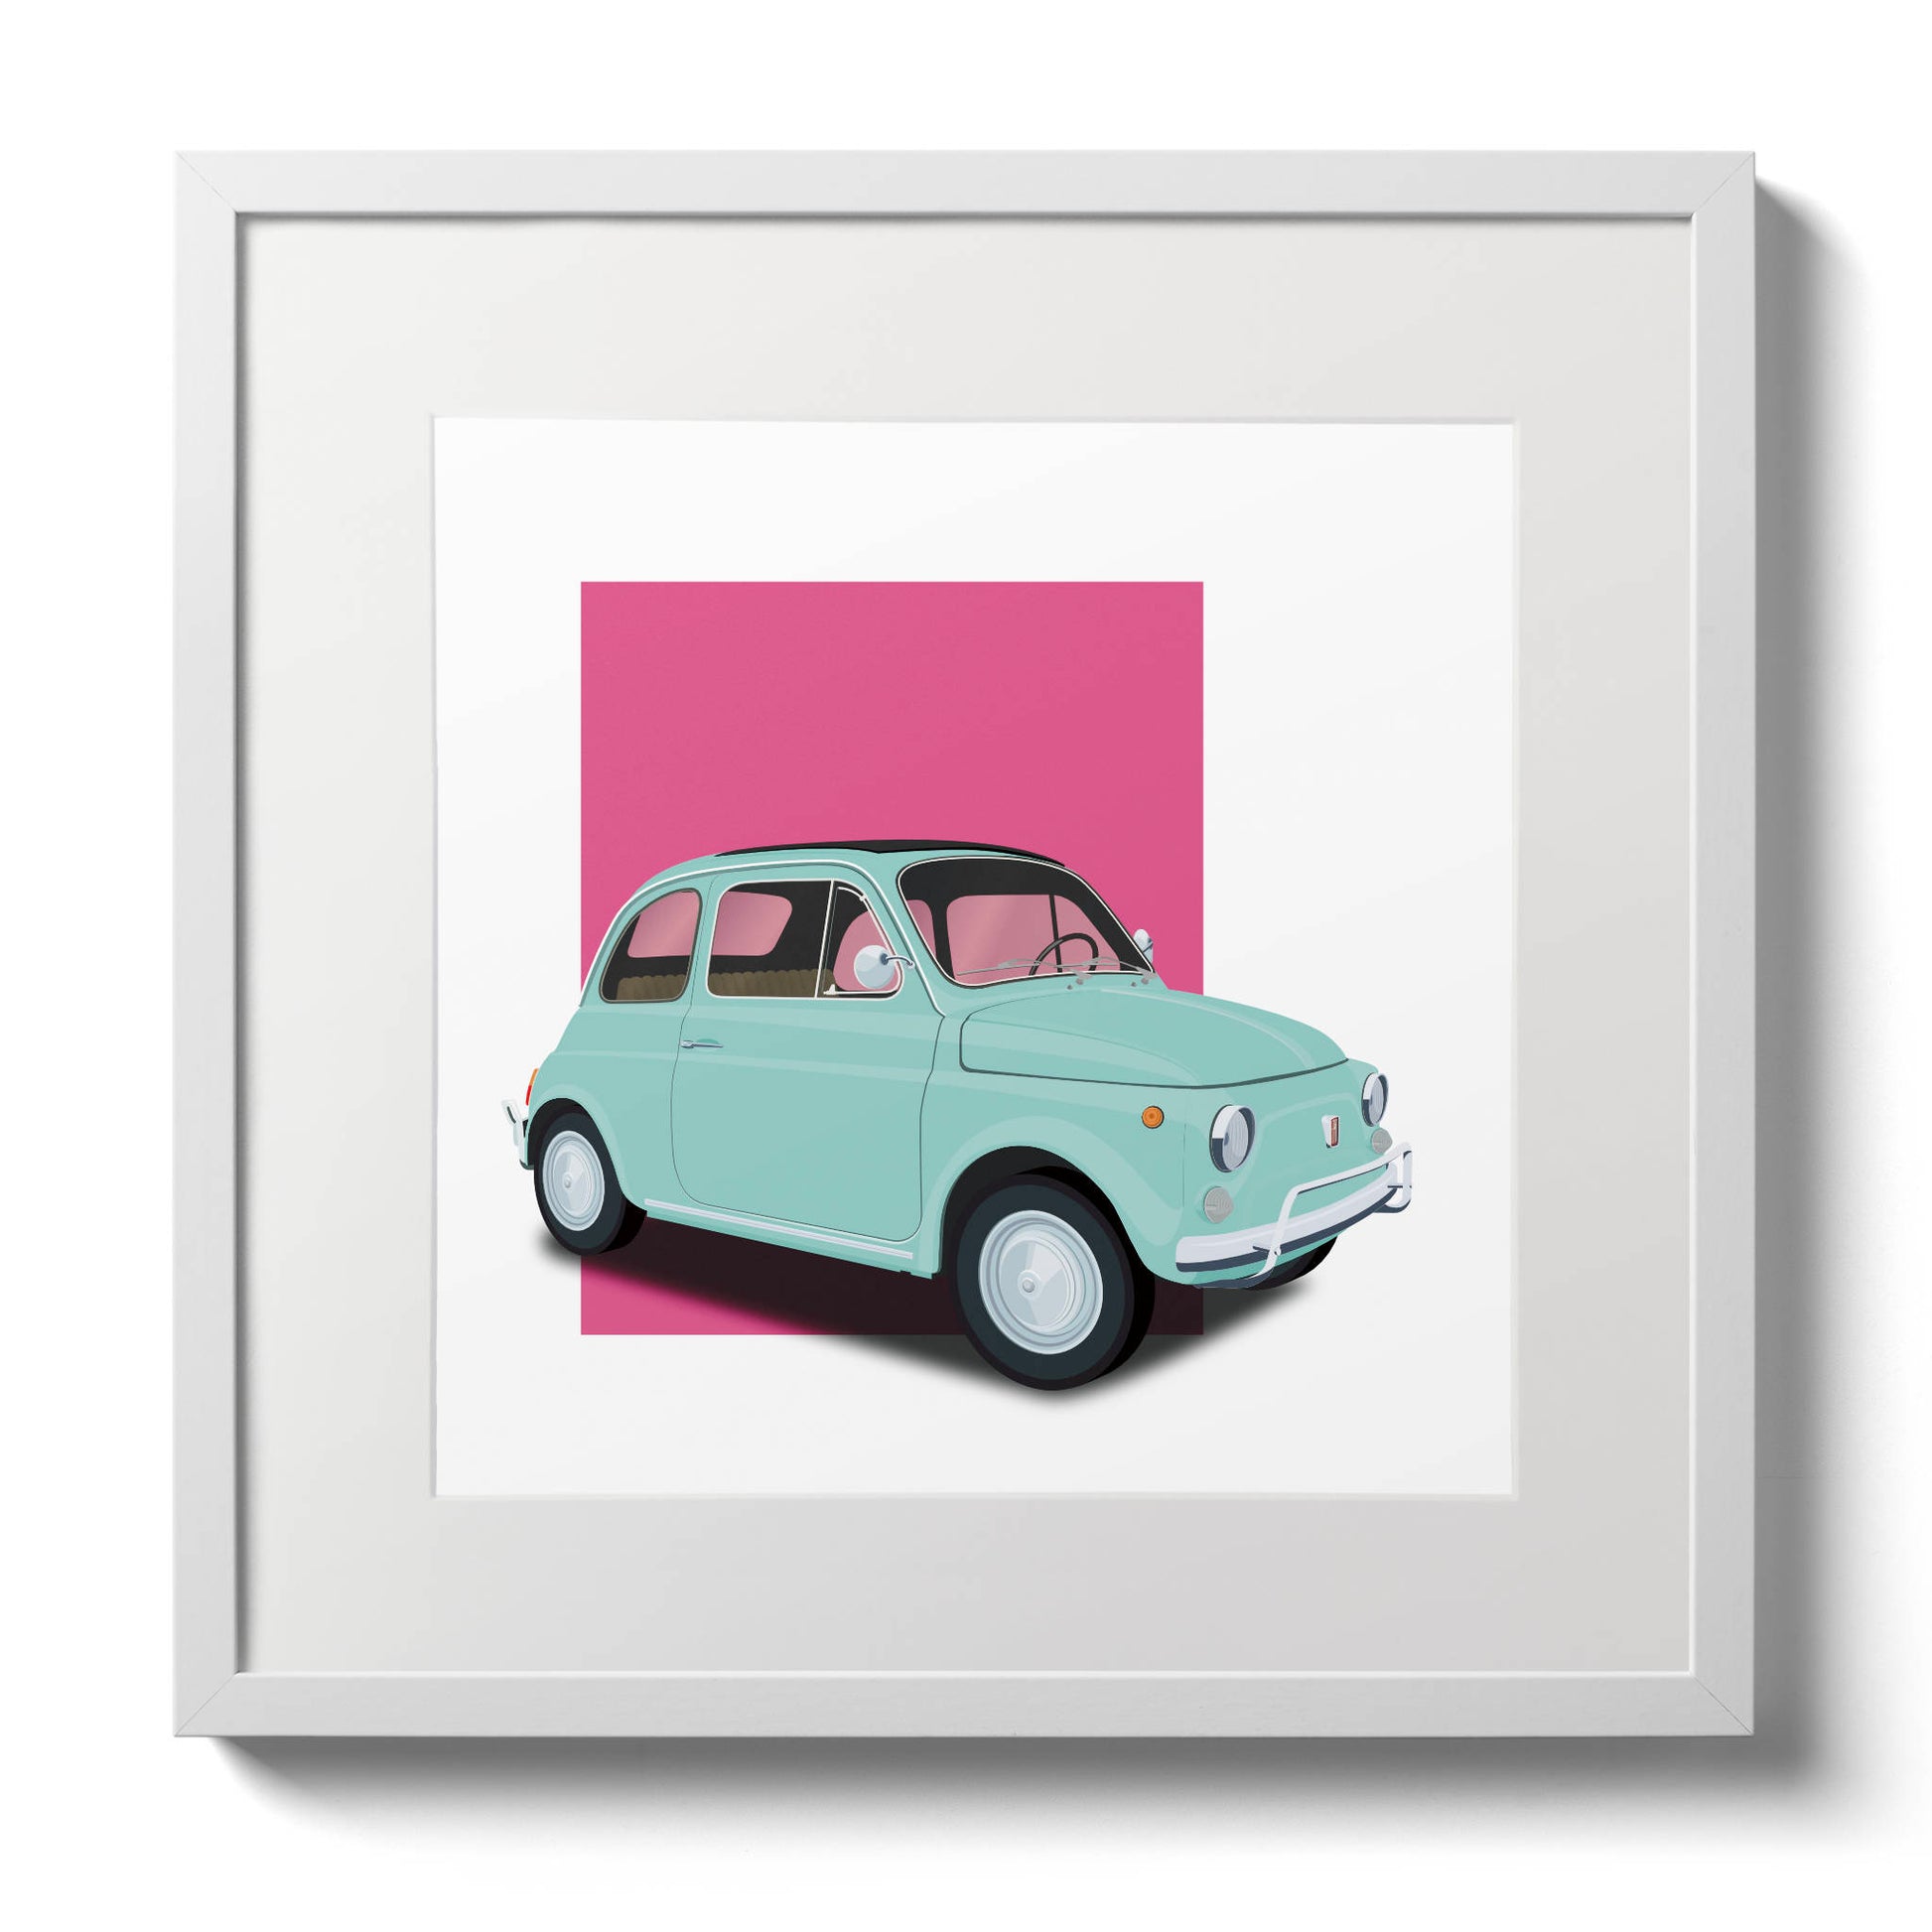 Contemporary framed illustration of the classic 1960s Fiat 500 Cinquecento in perfect baby blue with pink background, measuring 30 x 30cm